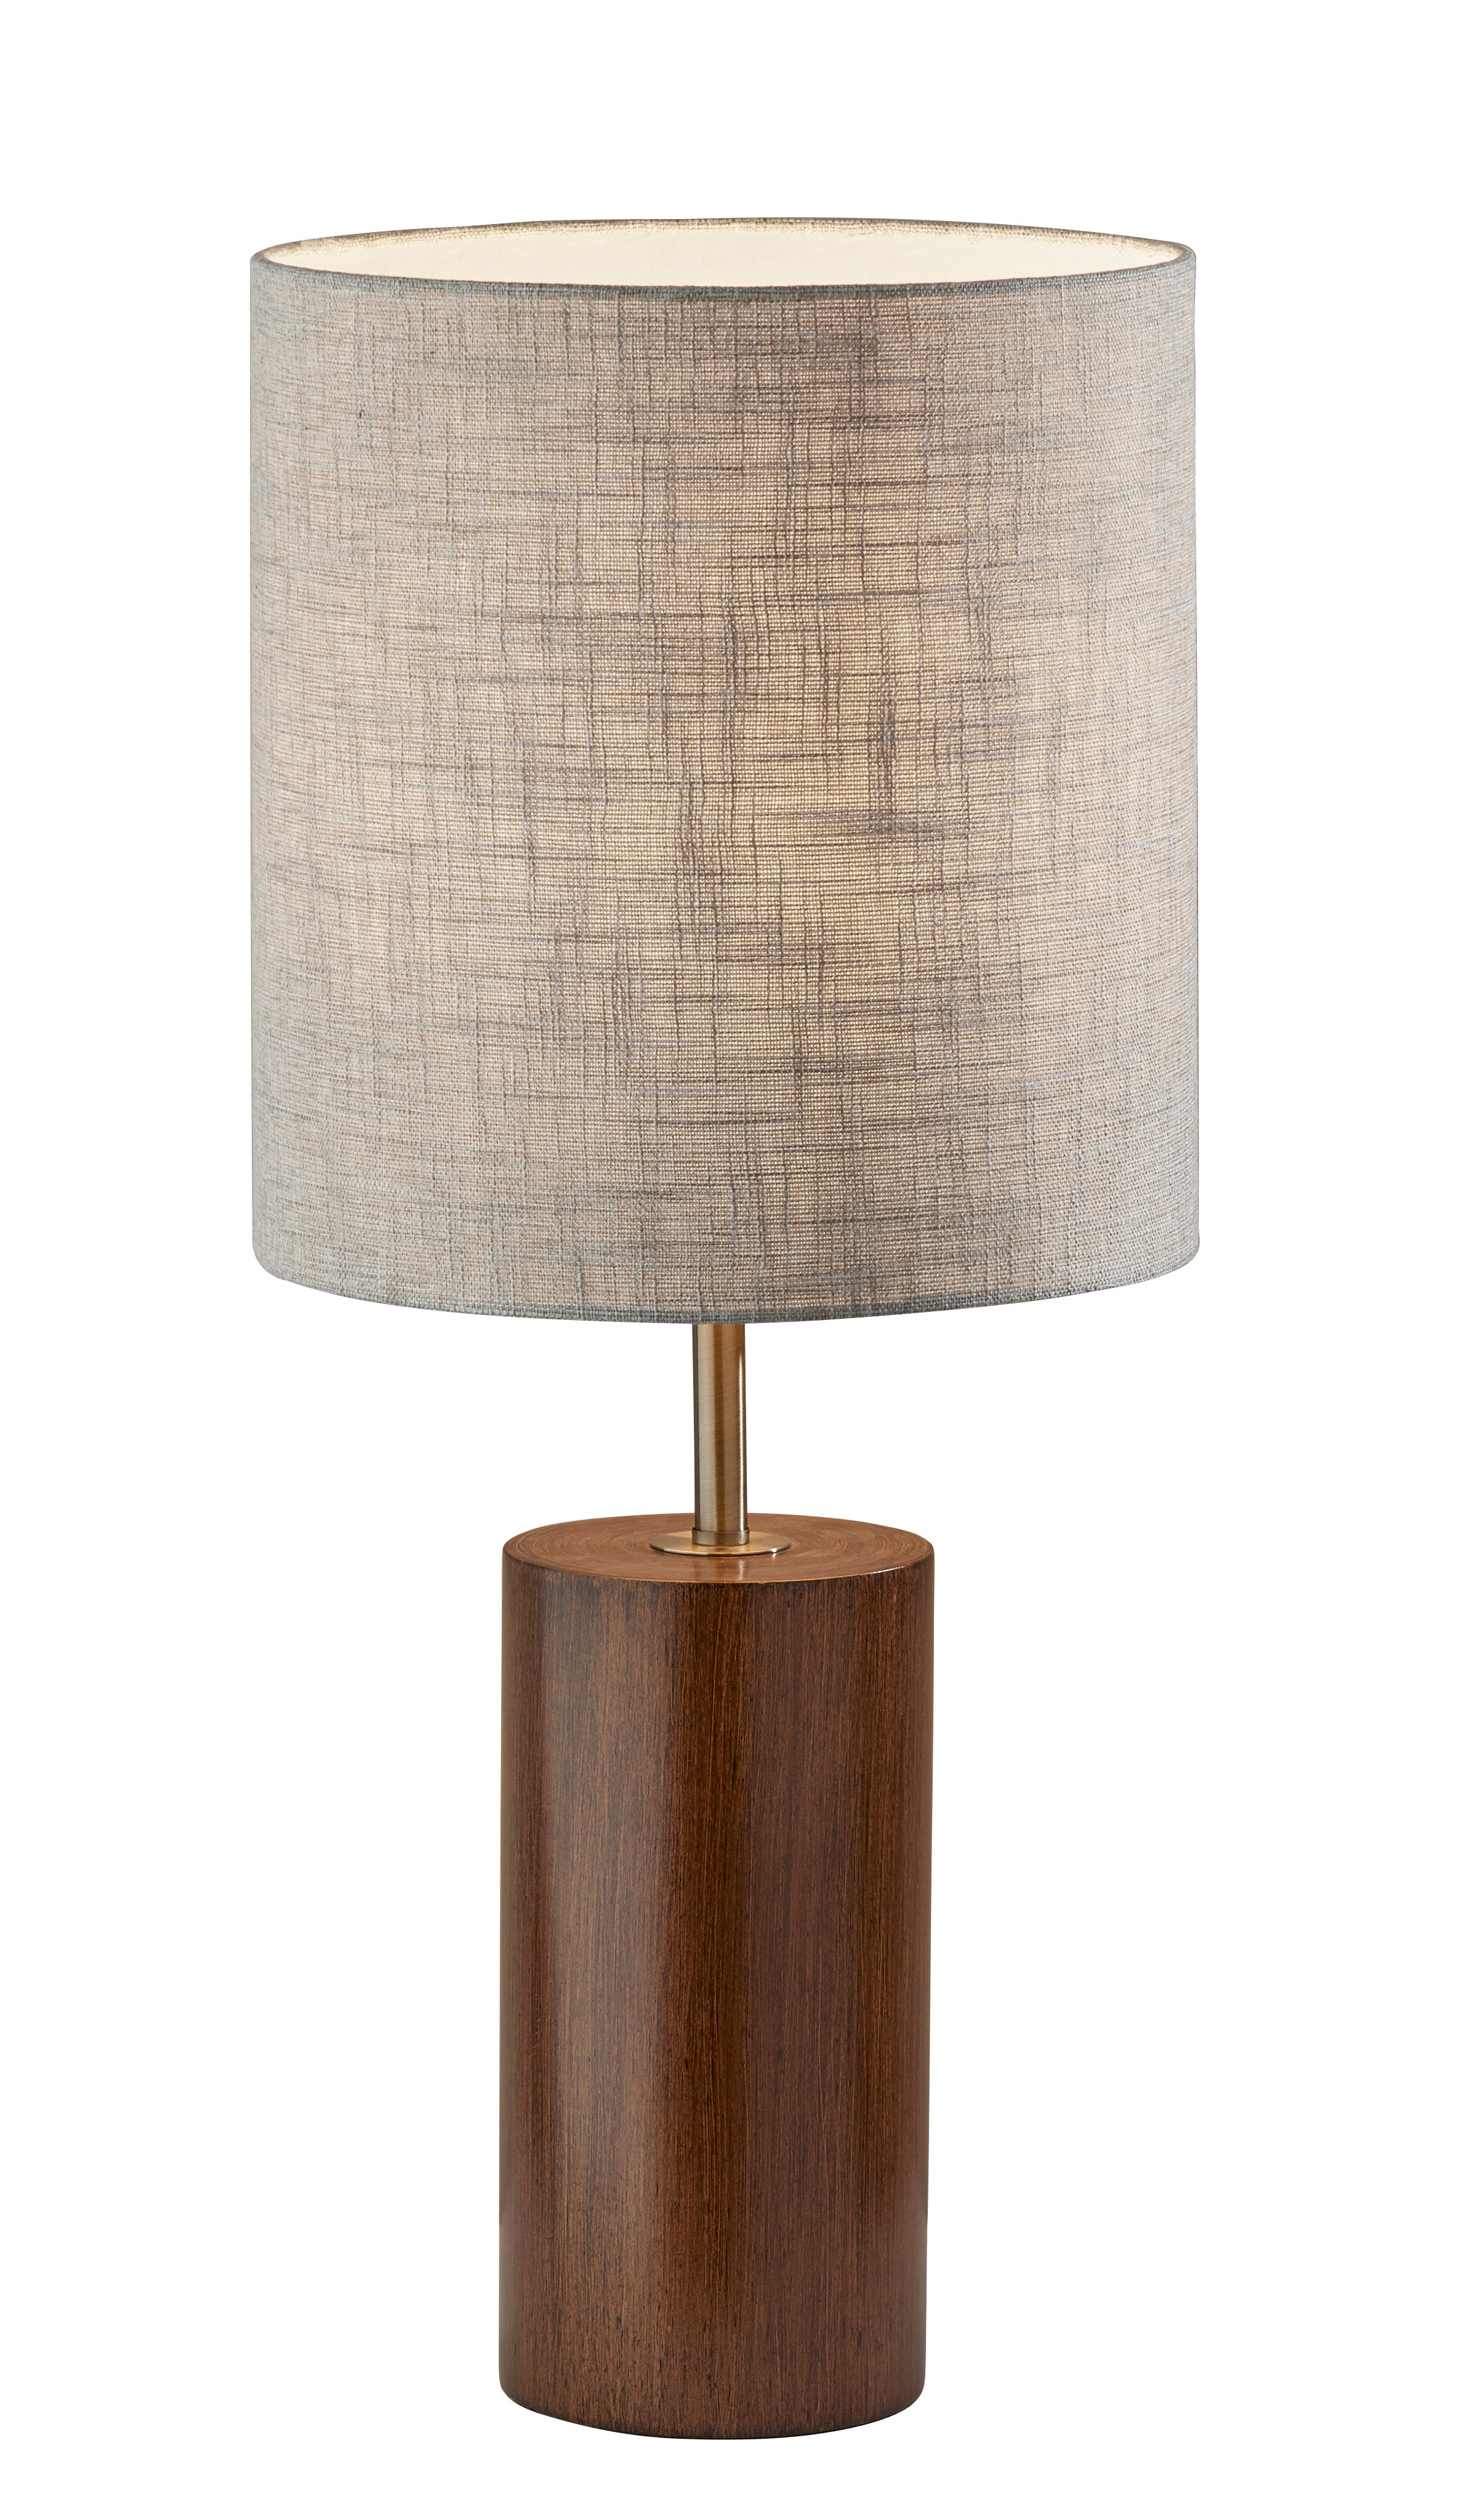 DEAN Table lamp Wood, Gold - 1507-15 | ADESSO